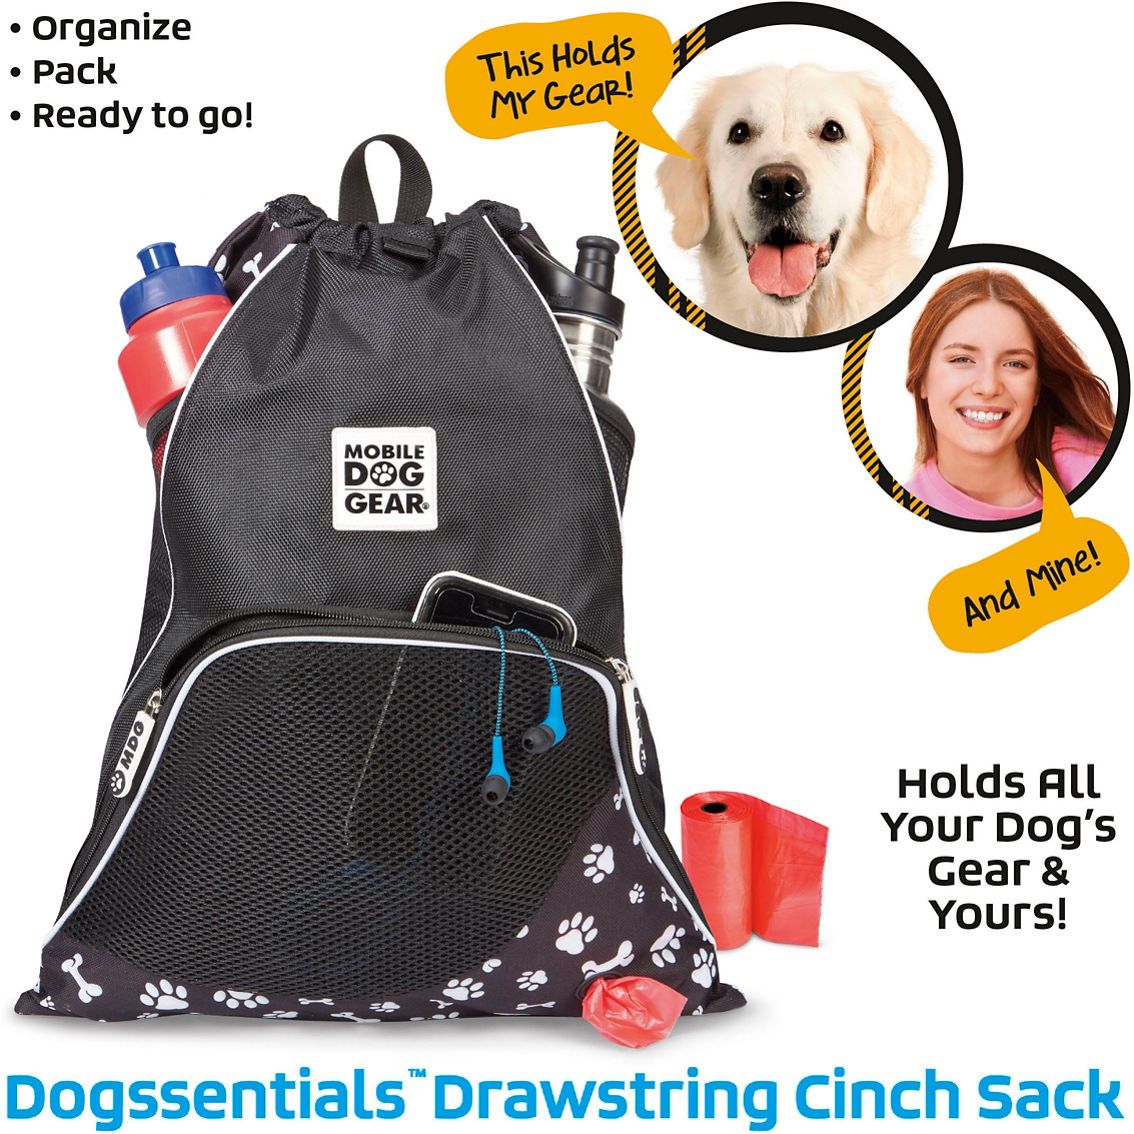 Mobile Dog Gear Dogssentials Tote Bag Black with White Paw Print - Image 7 of 8